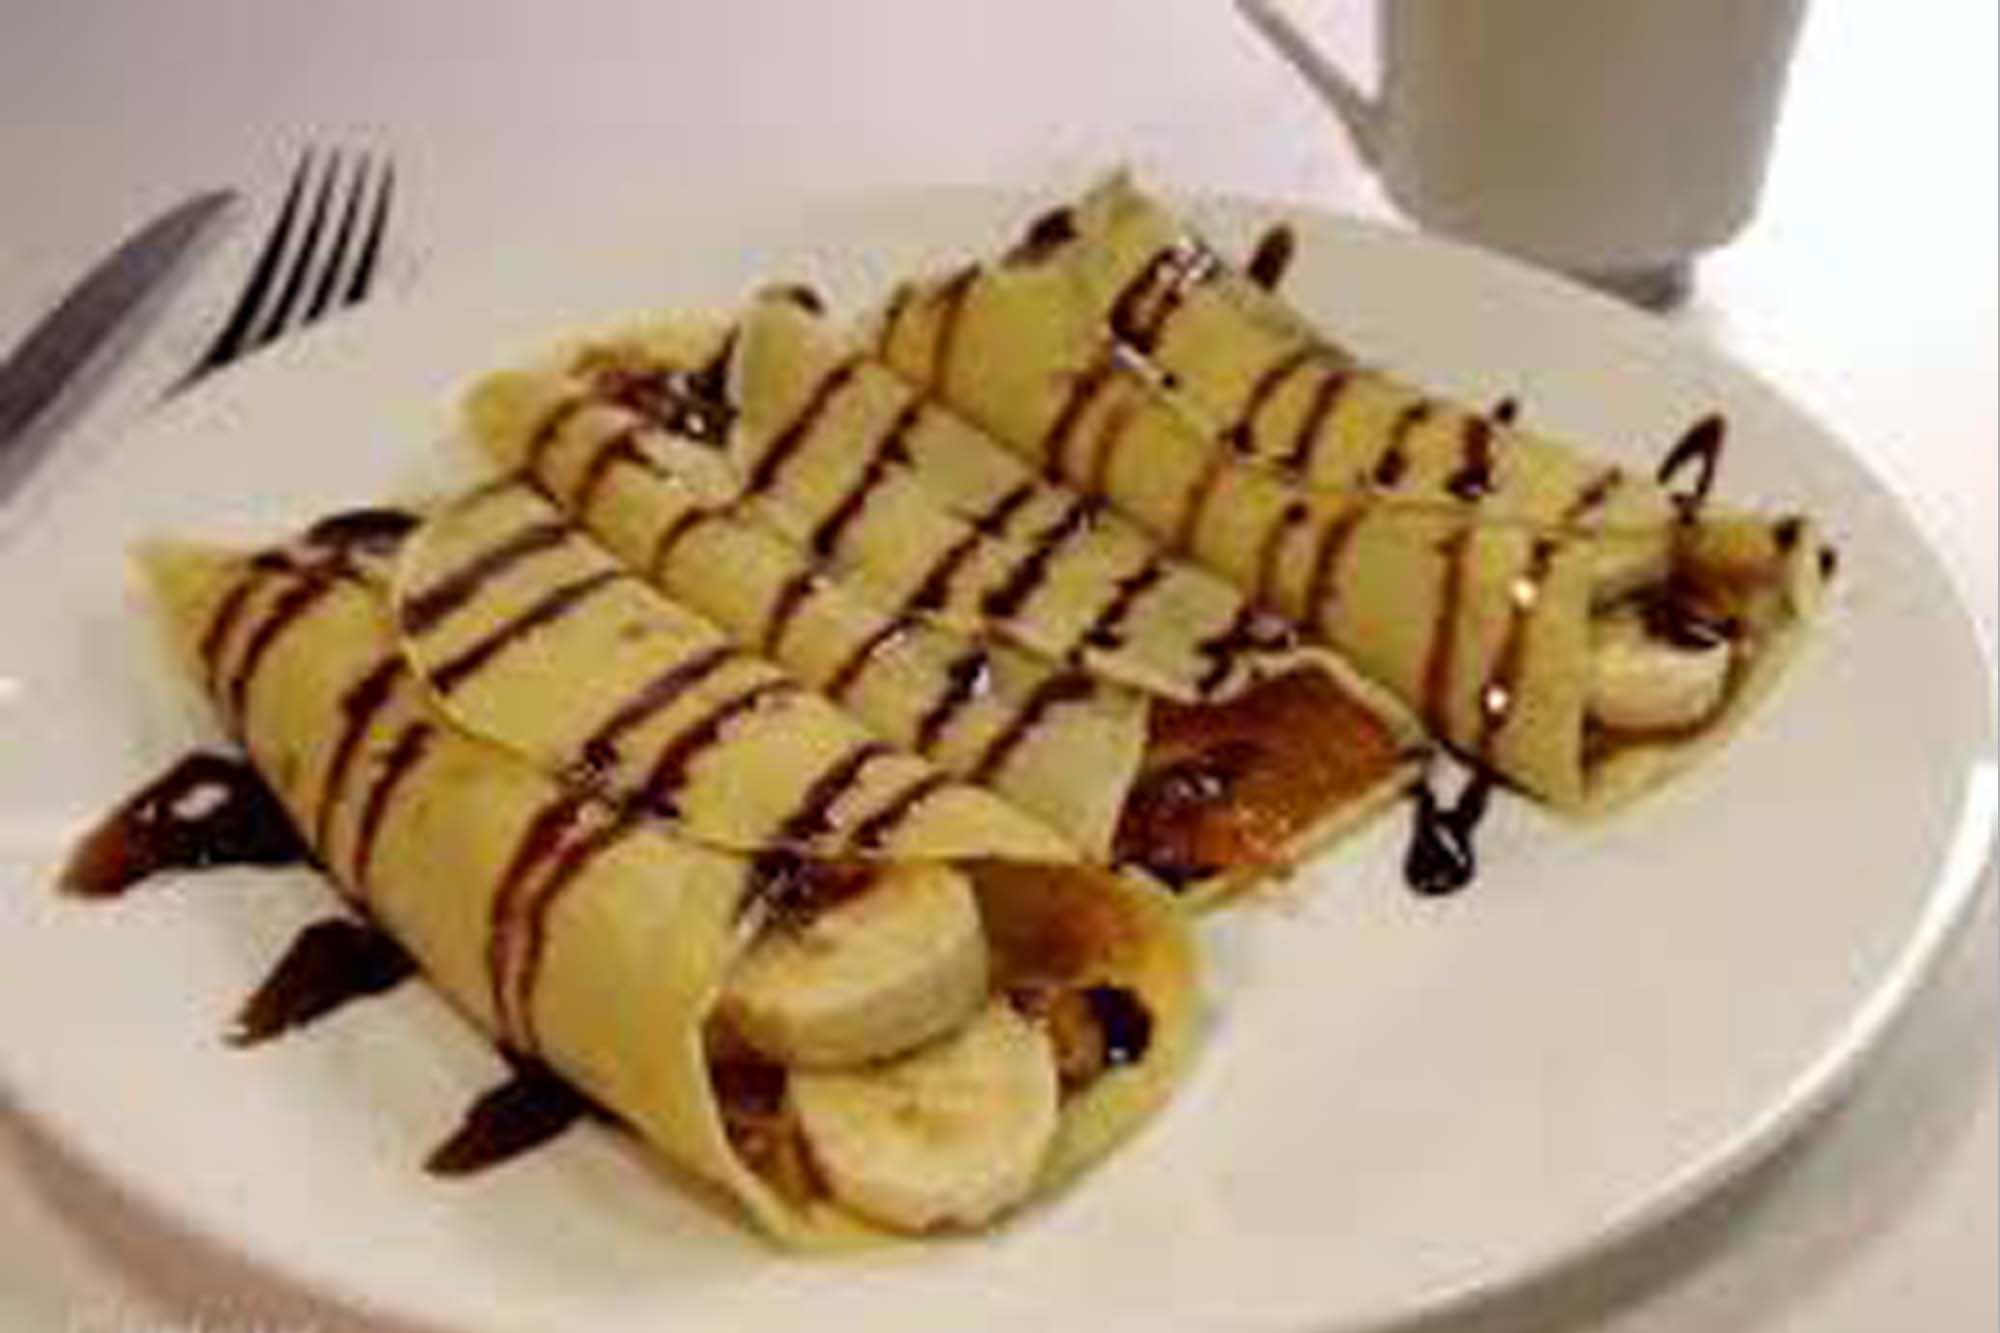 picture of french crepes, with banana pieces inside and drizzled in chocolate.